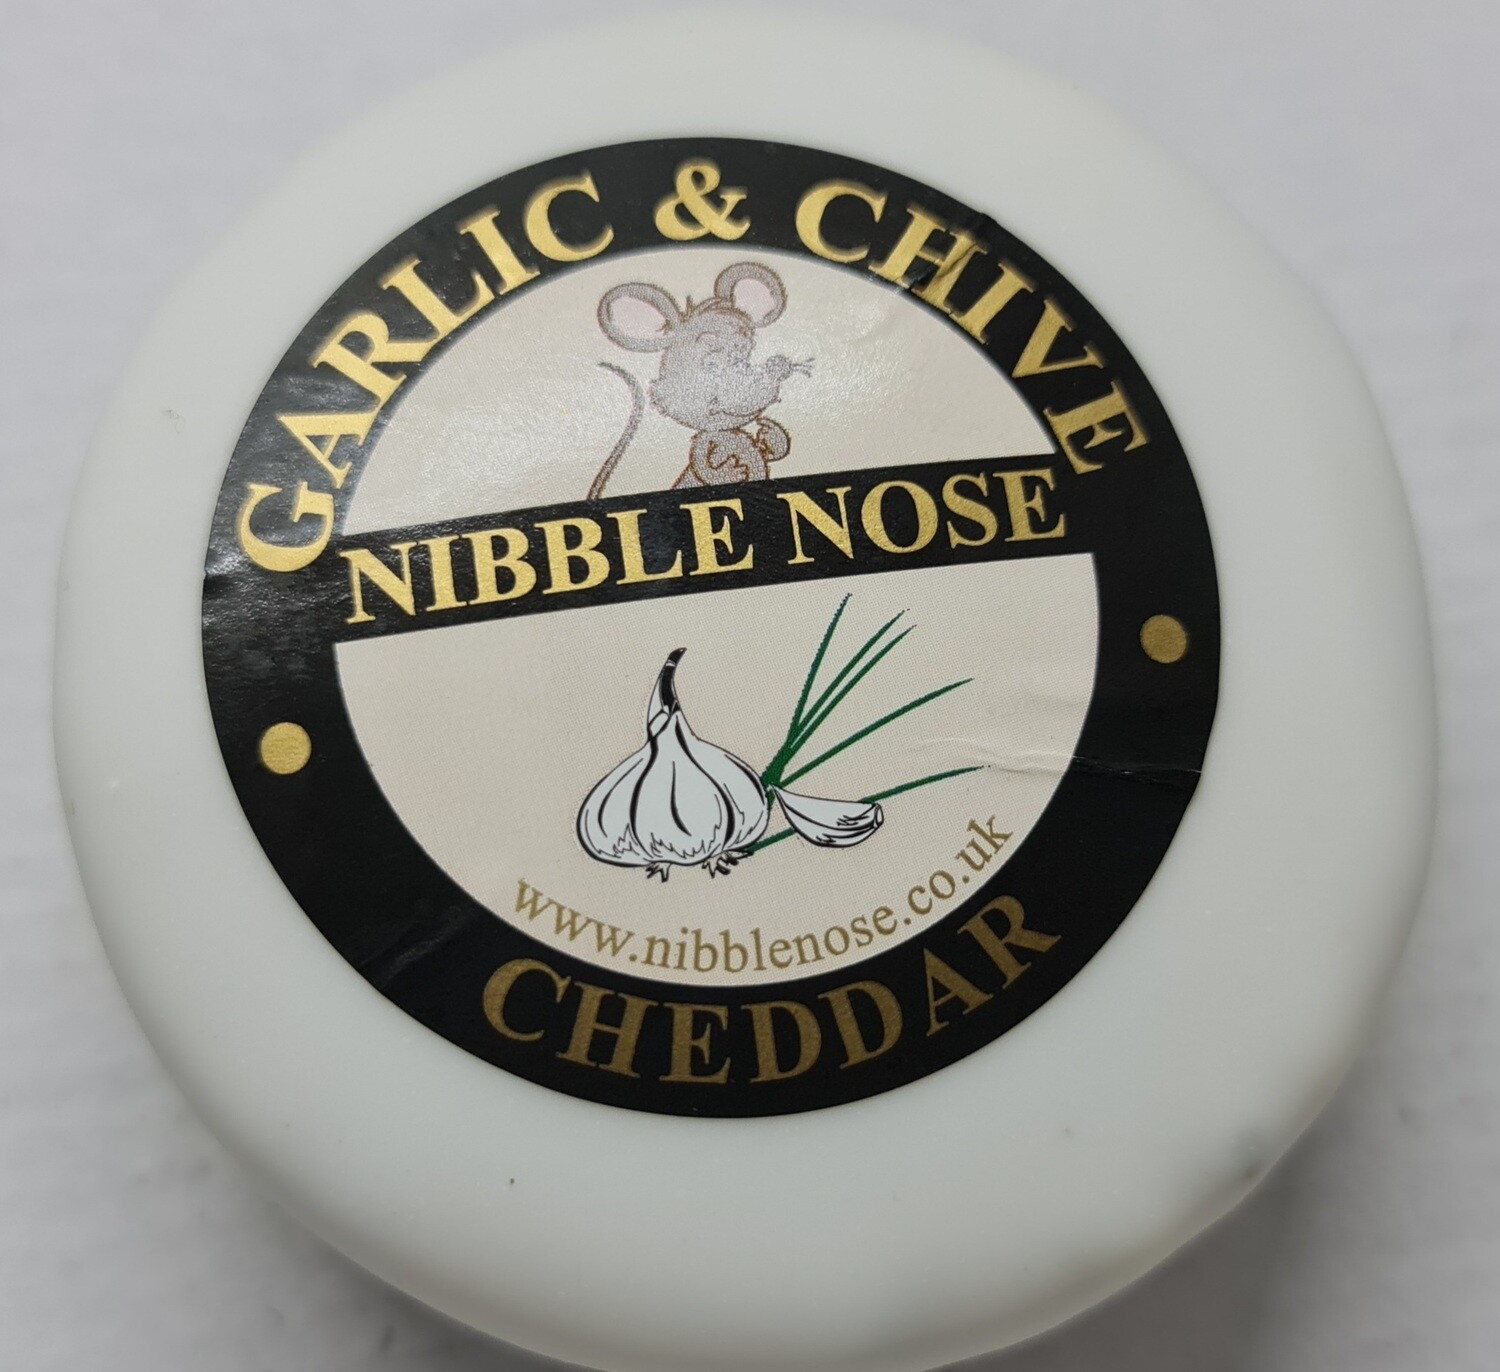 Nibble Nose Garlic and Chives